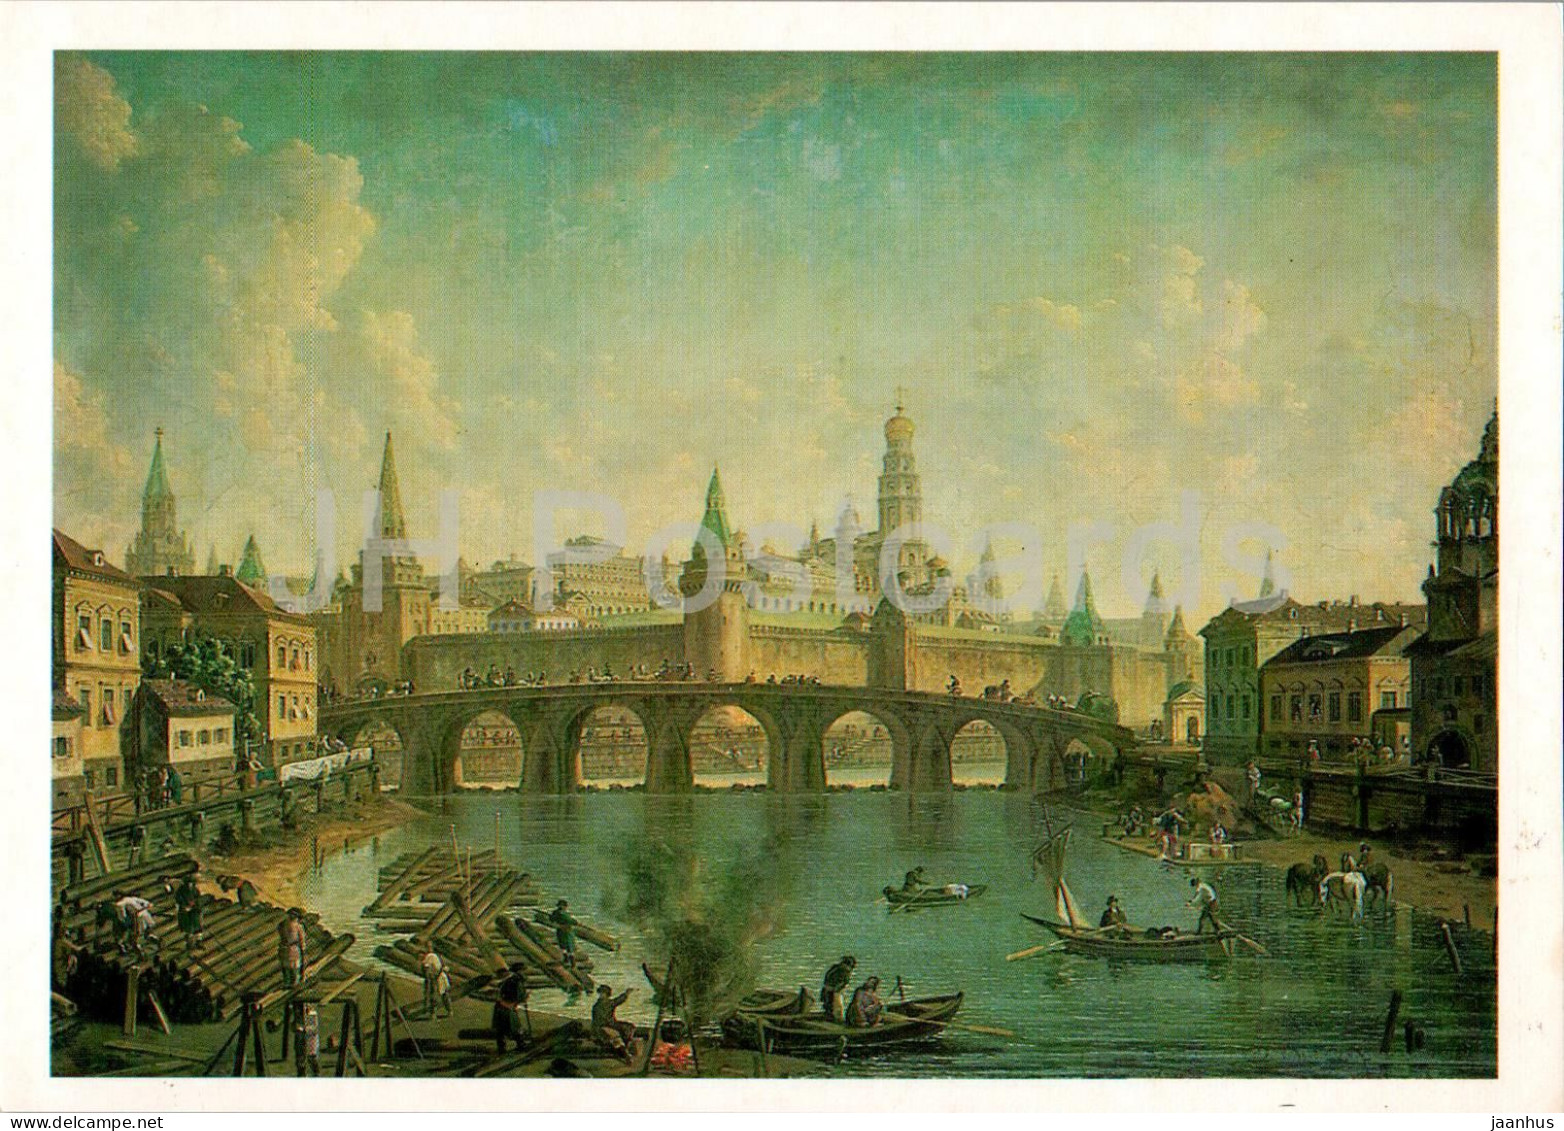 Painting By F. Alexeyev - View Of The Moscow Kremlin And The Stone Bridge - Russian Art - 1987 - Russia USSR - Unused - Pittura & Quadri